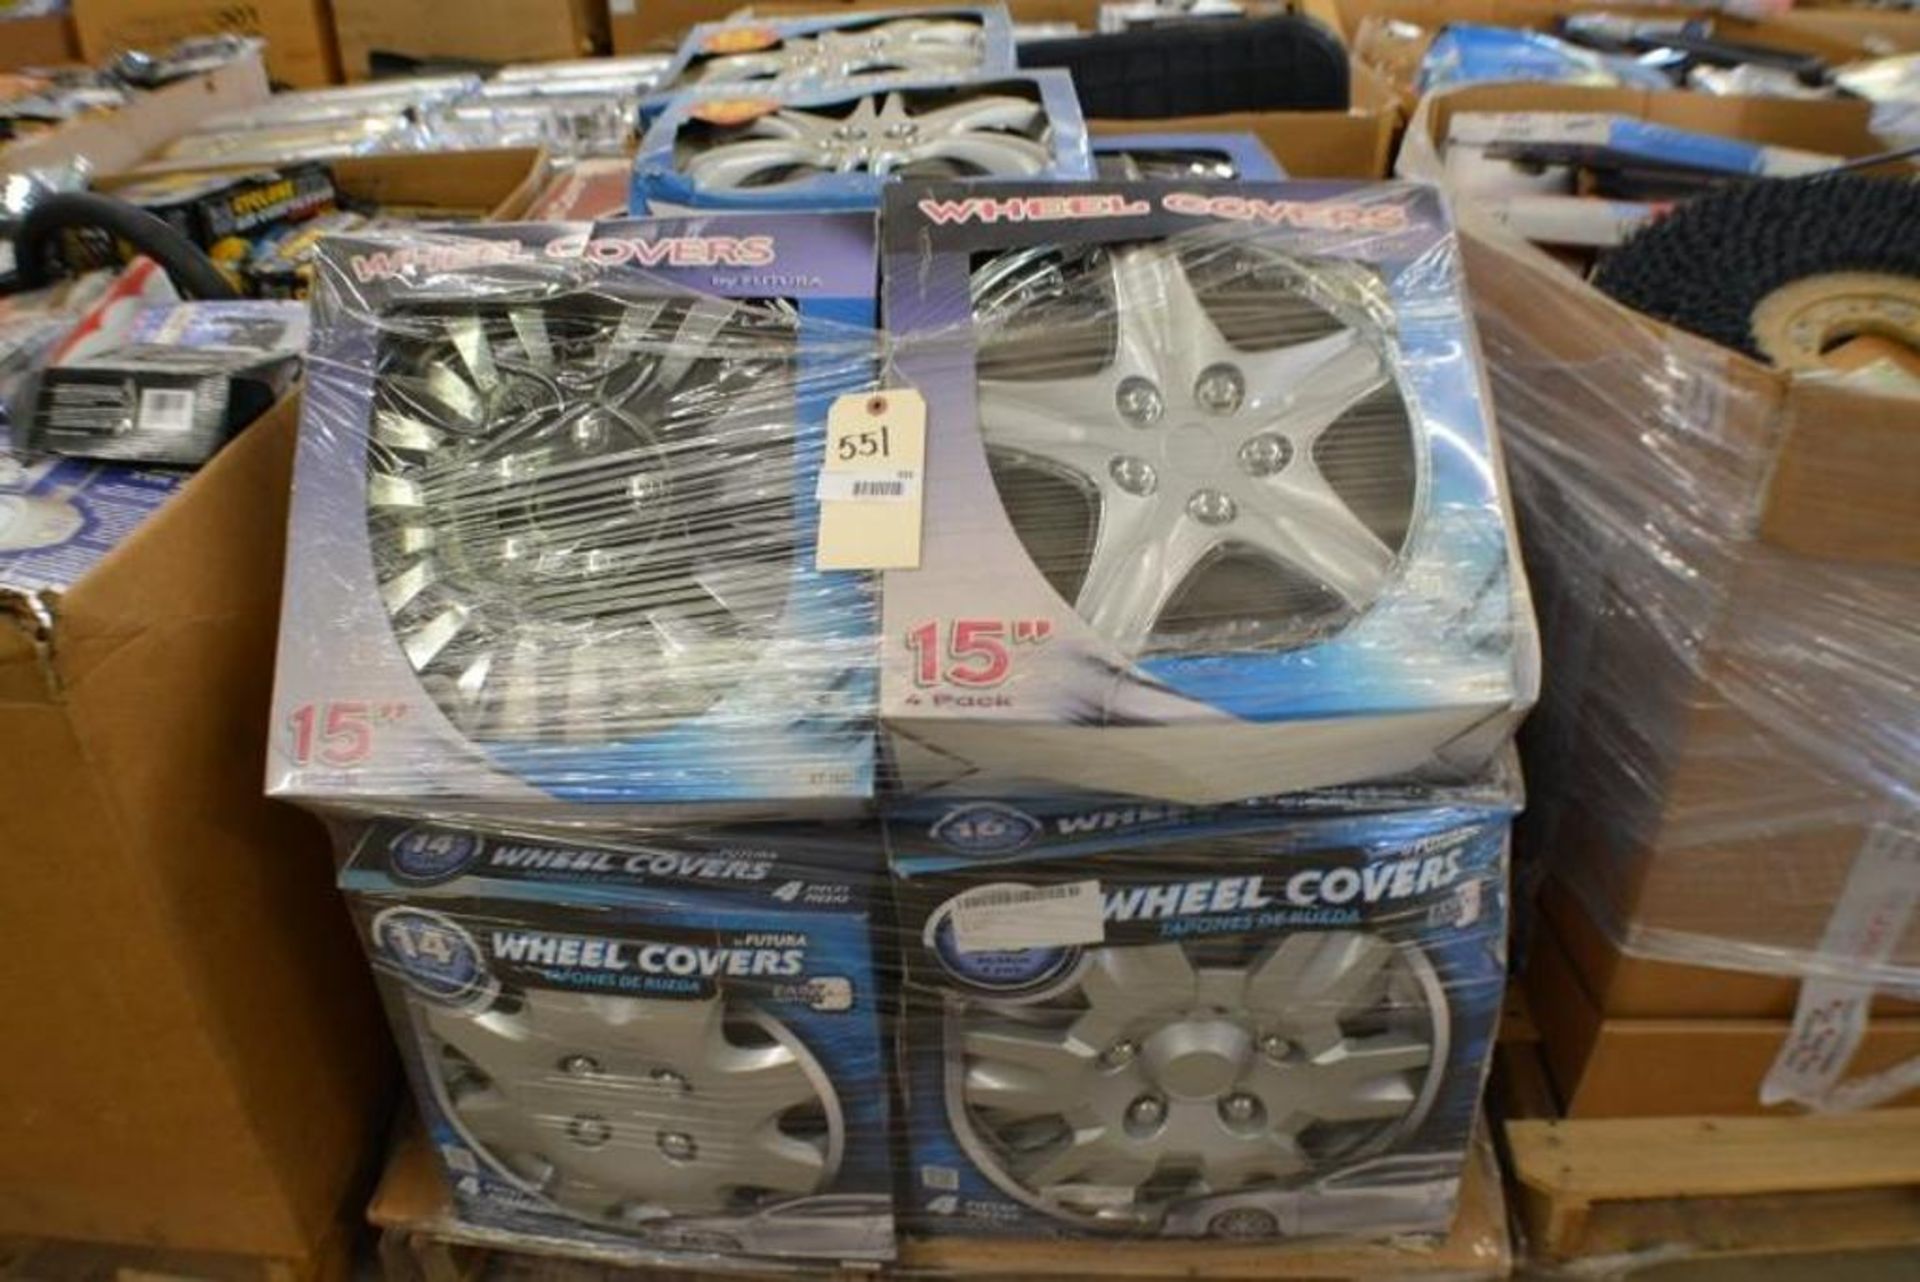 Wheel Covers Assorted Sizes. Contents of Gaylord